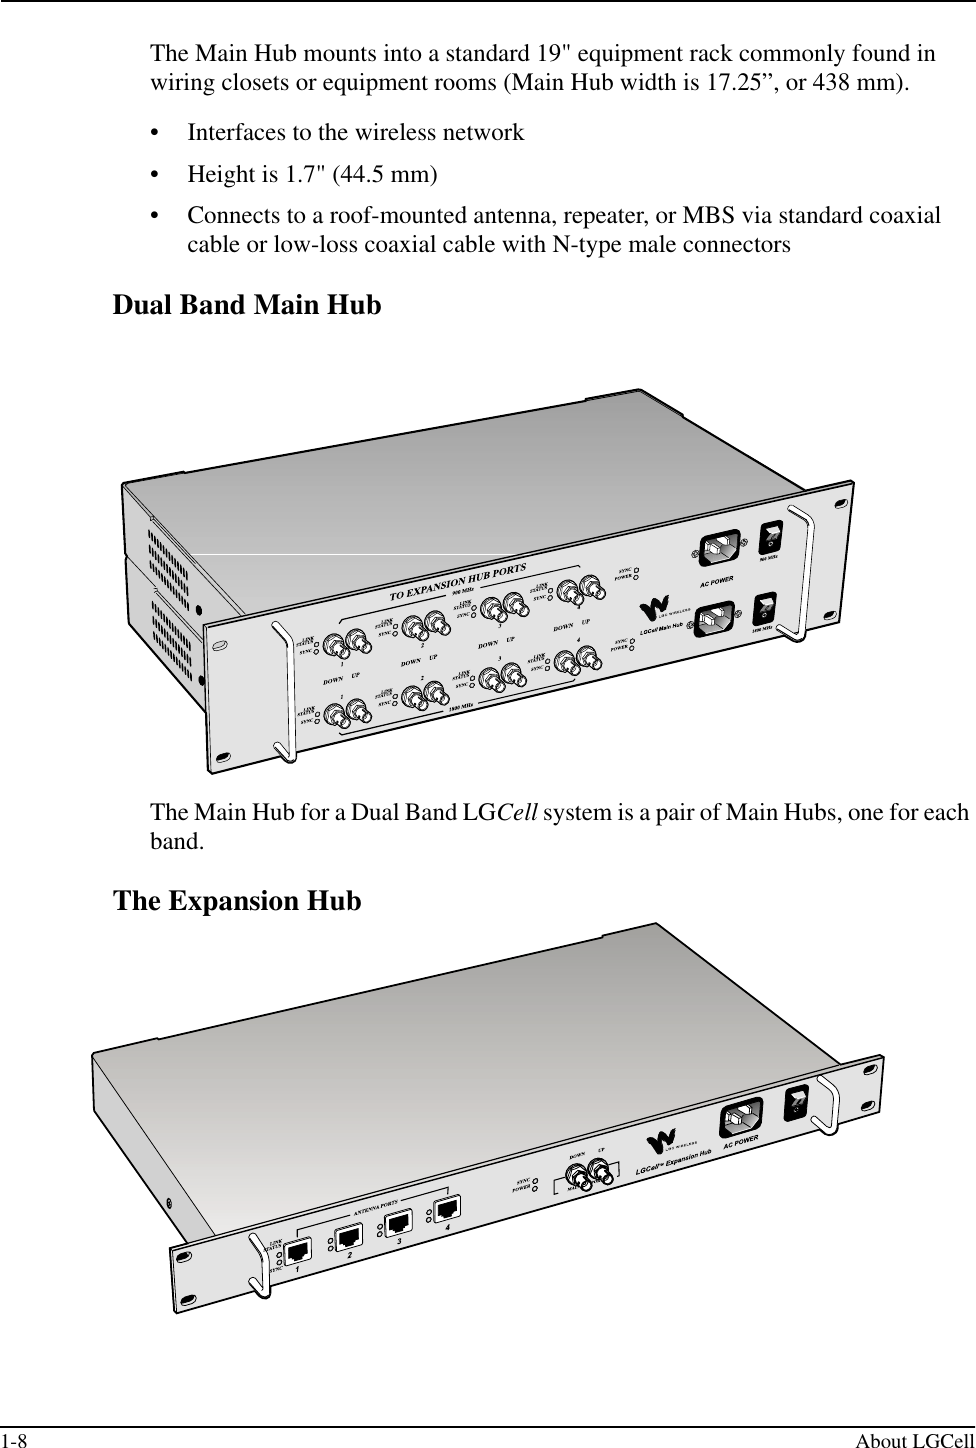 1-8 About LGCellThe Main Hub mounts into a standard 19&quot; equipment rack commonly found in wiring closets or equipment rooms (Main Hub width is 17.25”, or 438 mm).• Interfaces to the wireless network• Height is 1.7&quot; (44.5 mm)• Connects to a roof-mounted antenna, repeater, or MBS via standard coaxial cable or low-loss coaxial cable with N-type male connectorsDual Band Main HubThe Main Hub for a Dual Band LGCell system is a pair of Main Hubs, one for each band.The Expansion Hub